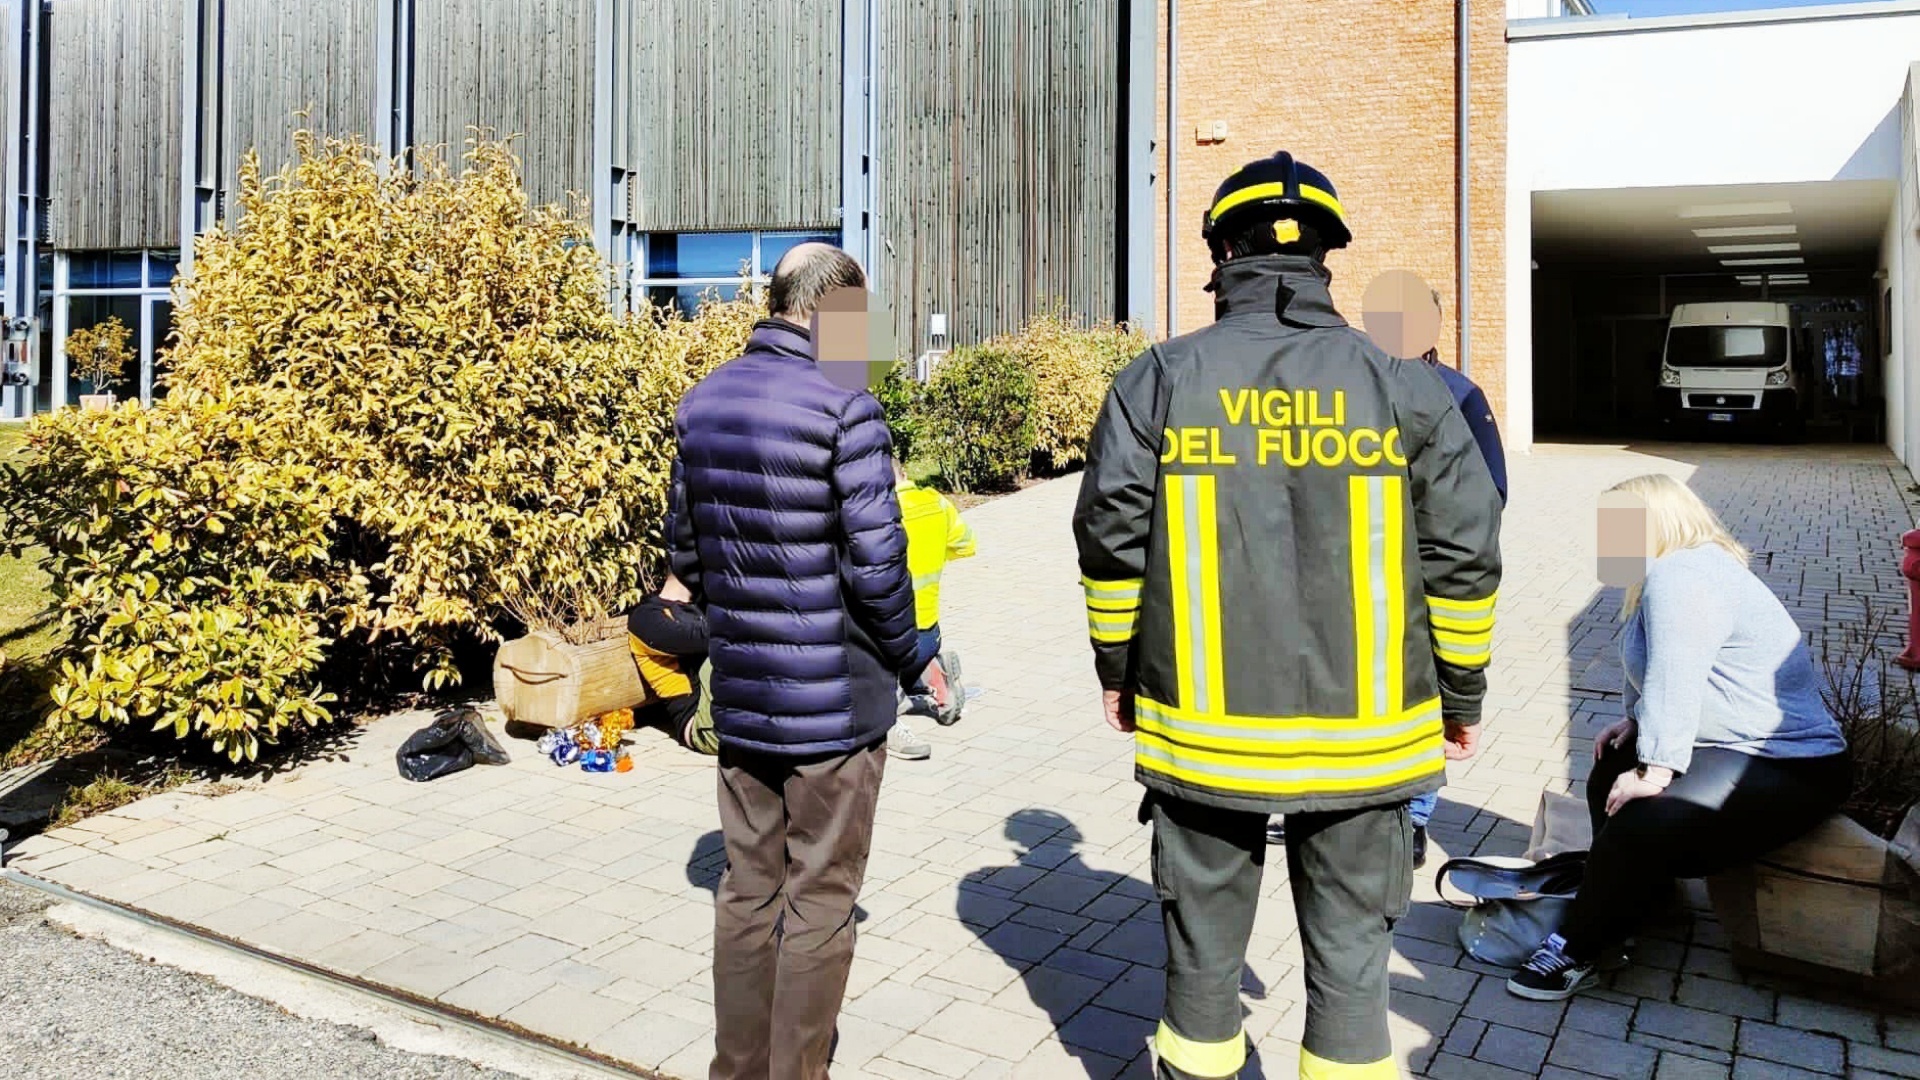 Emergency services were called to the Monti Lessini Sports Center in Carcaro, Verona, in the north of the country at around 10am on Friday.